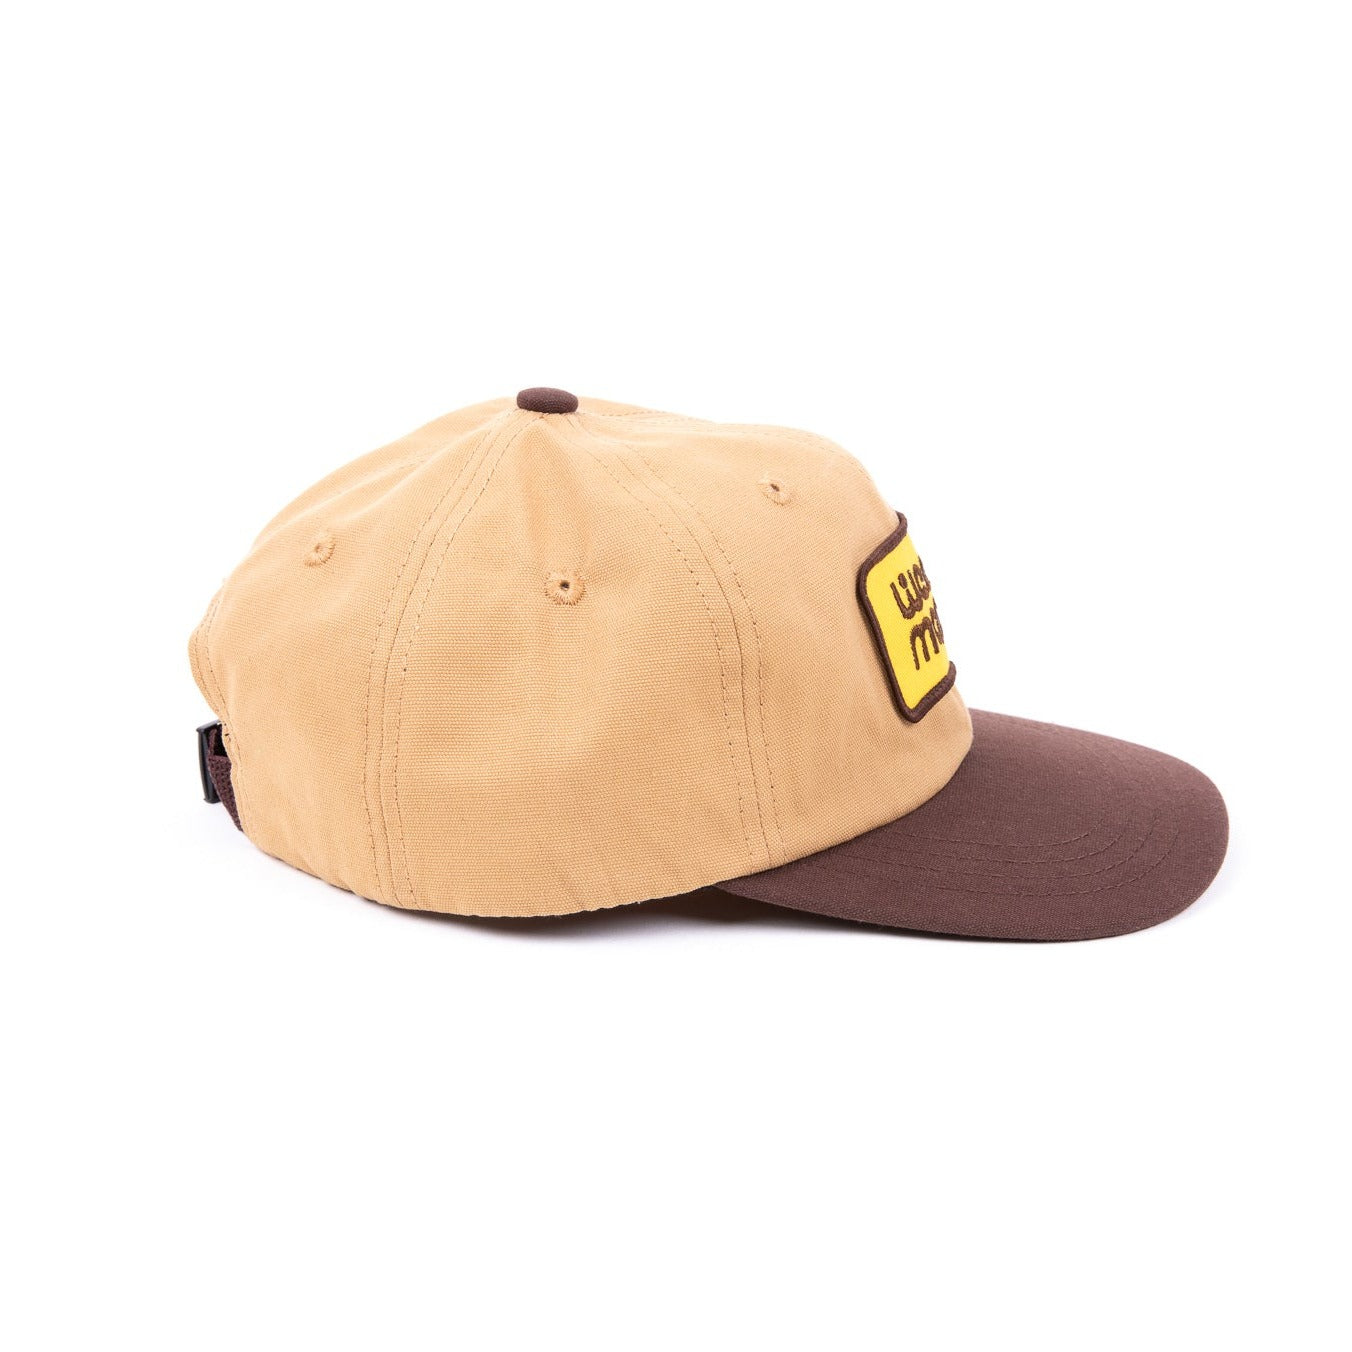 Weed Masters Cotton Duck work hat